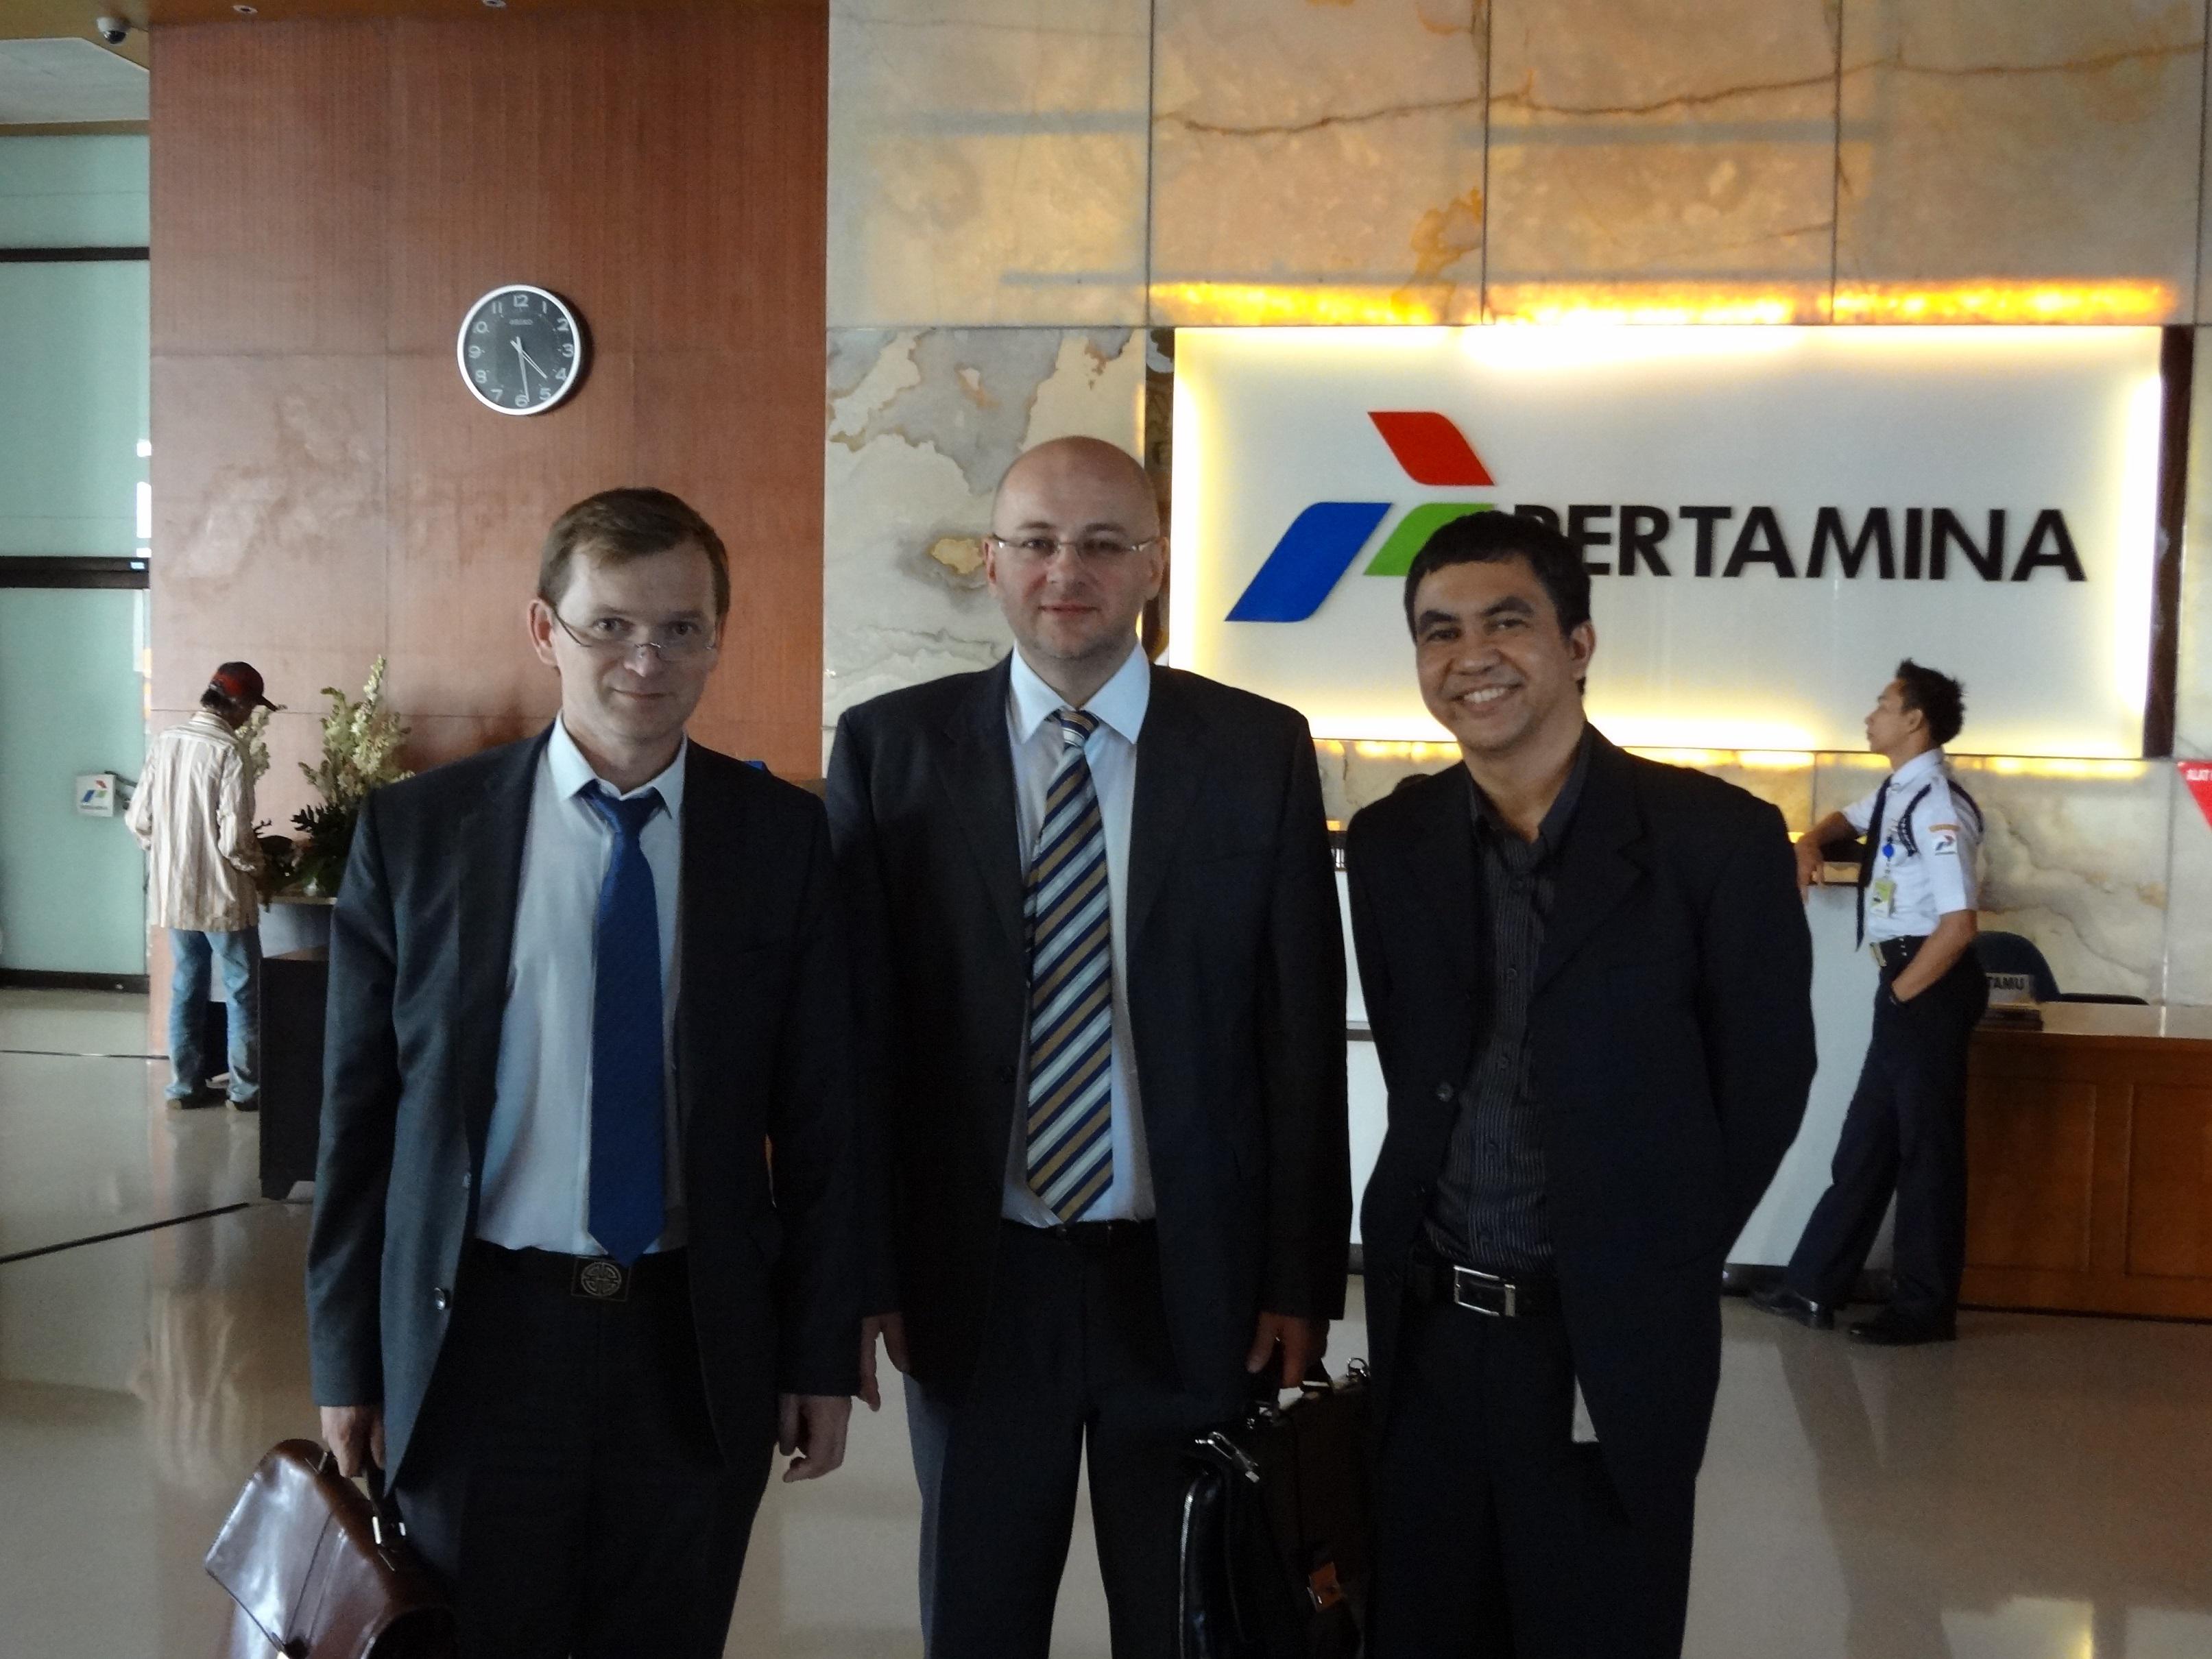 Victor Tarusin, CEO of Russia-ASEAN Business Council at the Chamber of Commerce and Industry of the Russian Federation and Ruslan Tokaev, founder of Nizhny Novgorod Institute of Applied Technologies during the visit to Petramina